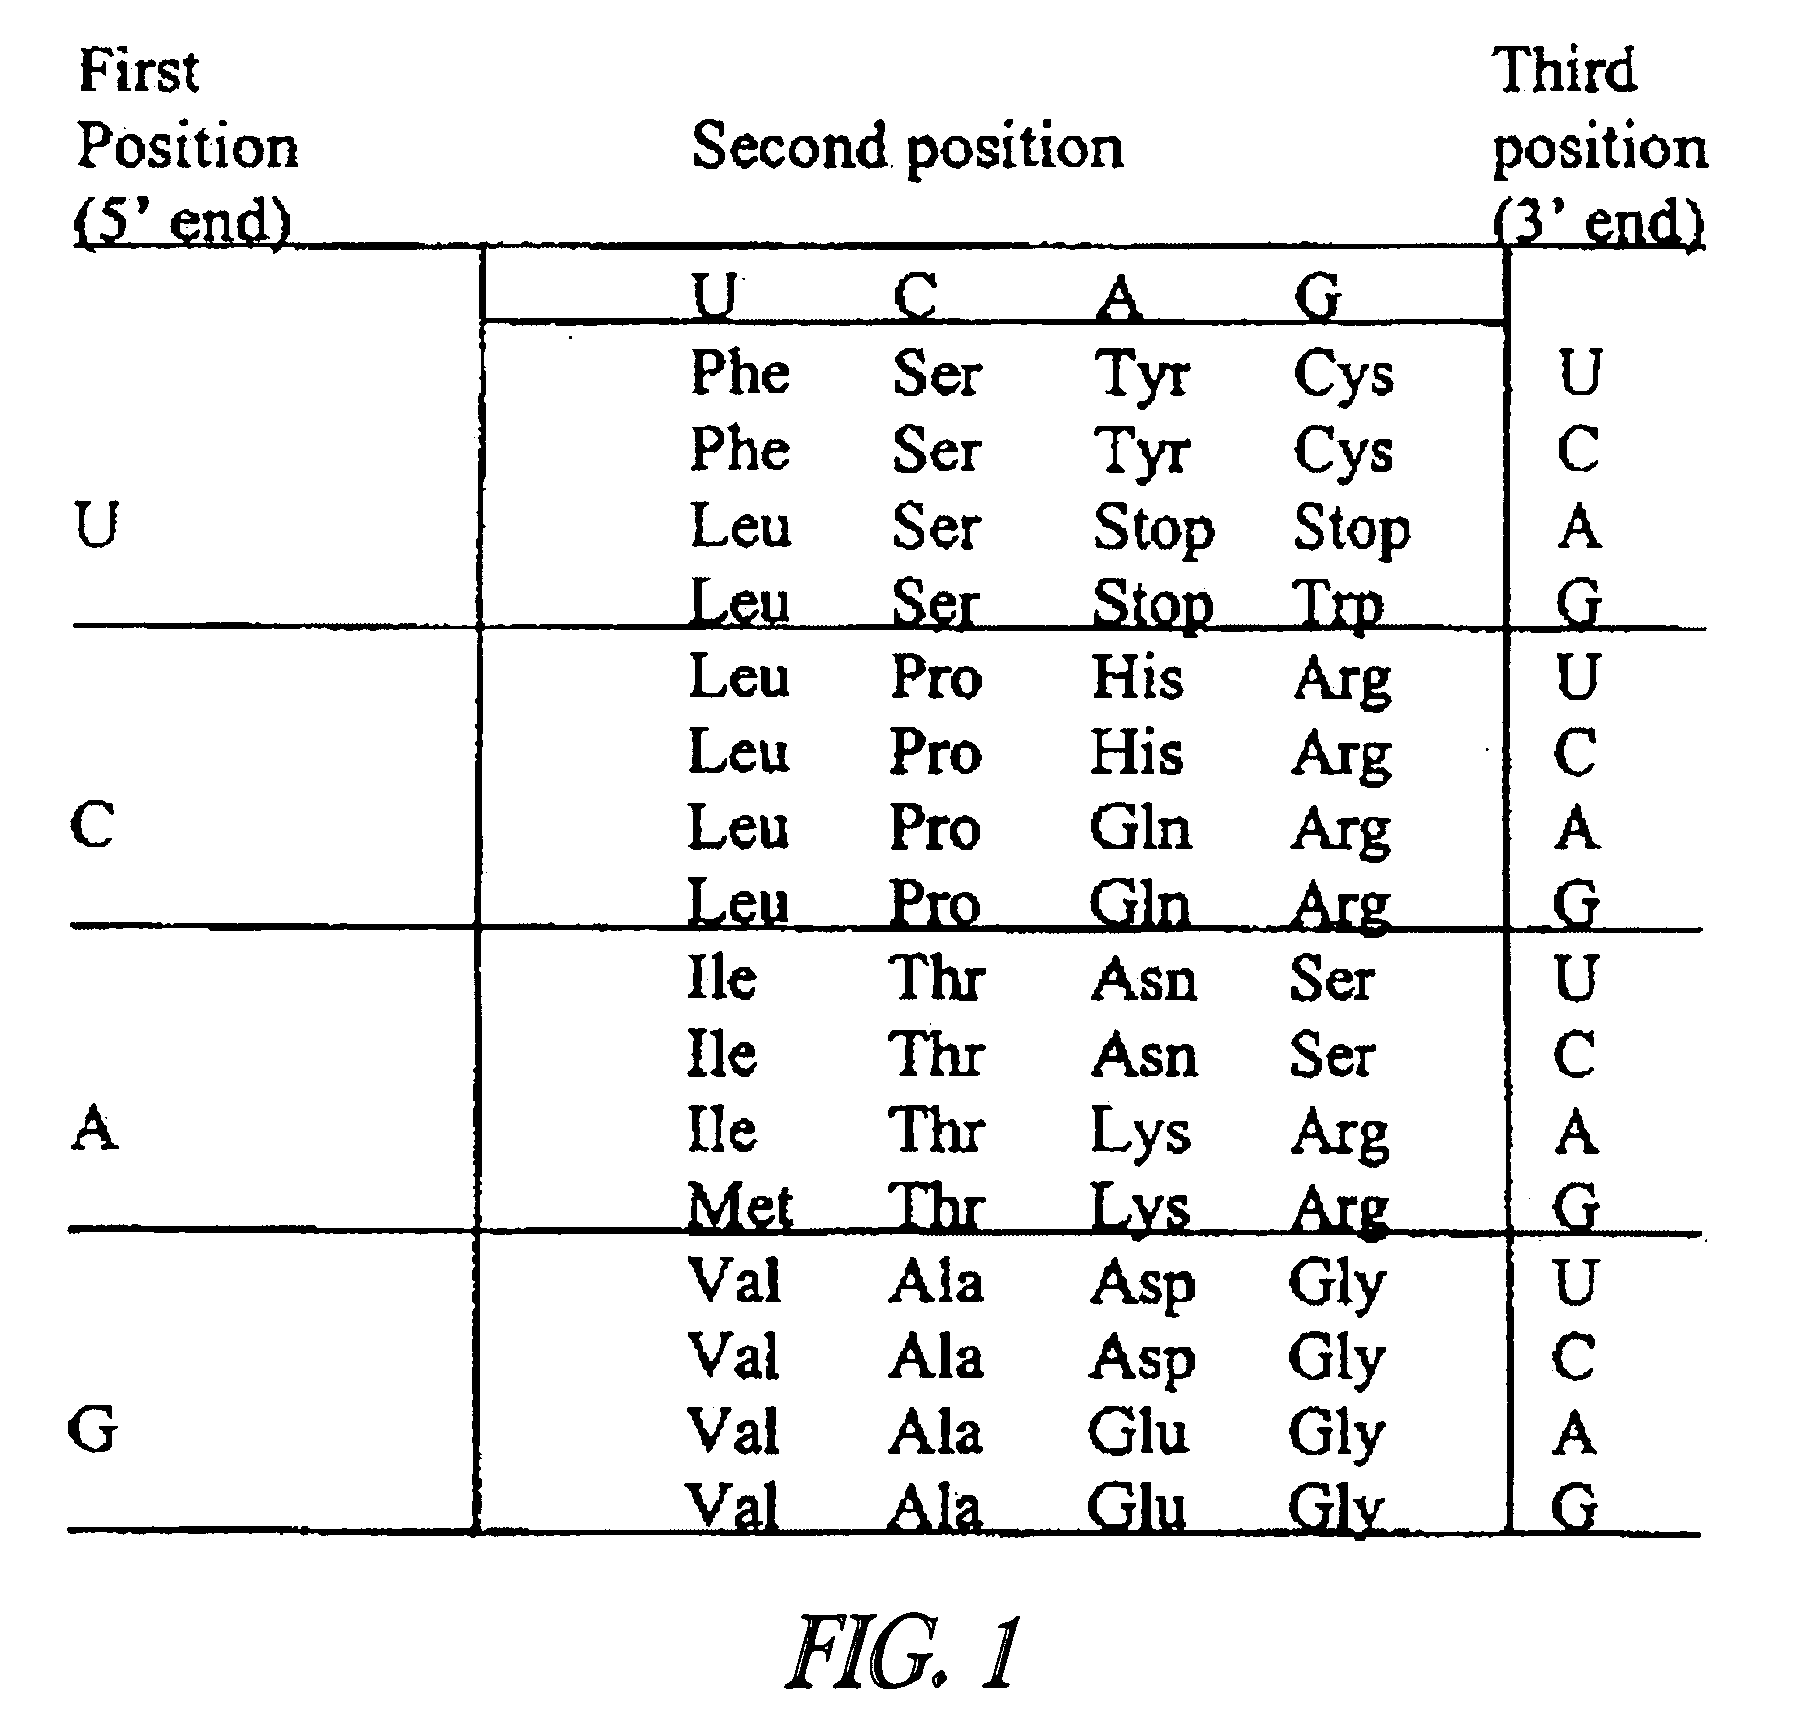 Synthetic nucleic acid molecule compositions and methods of preparation